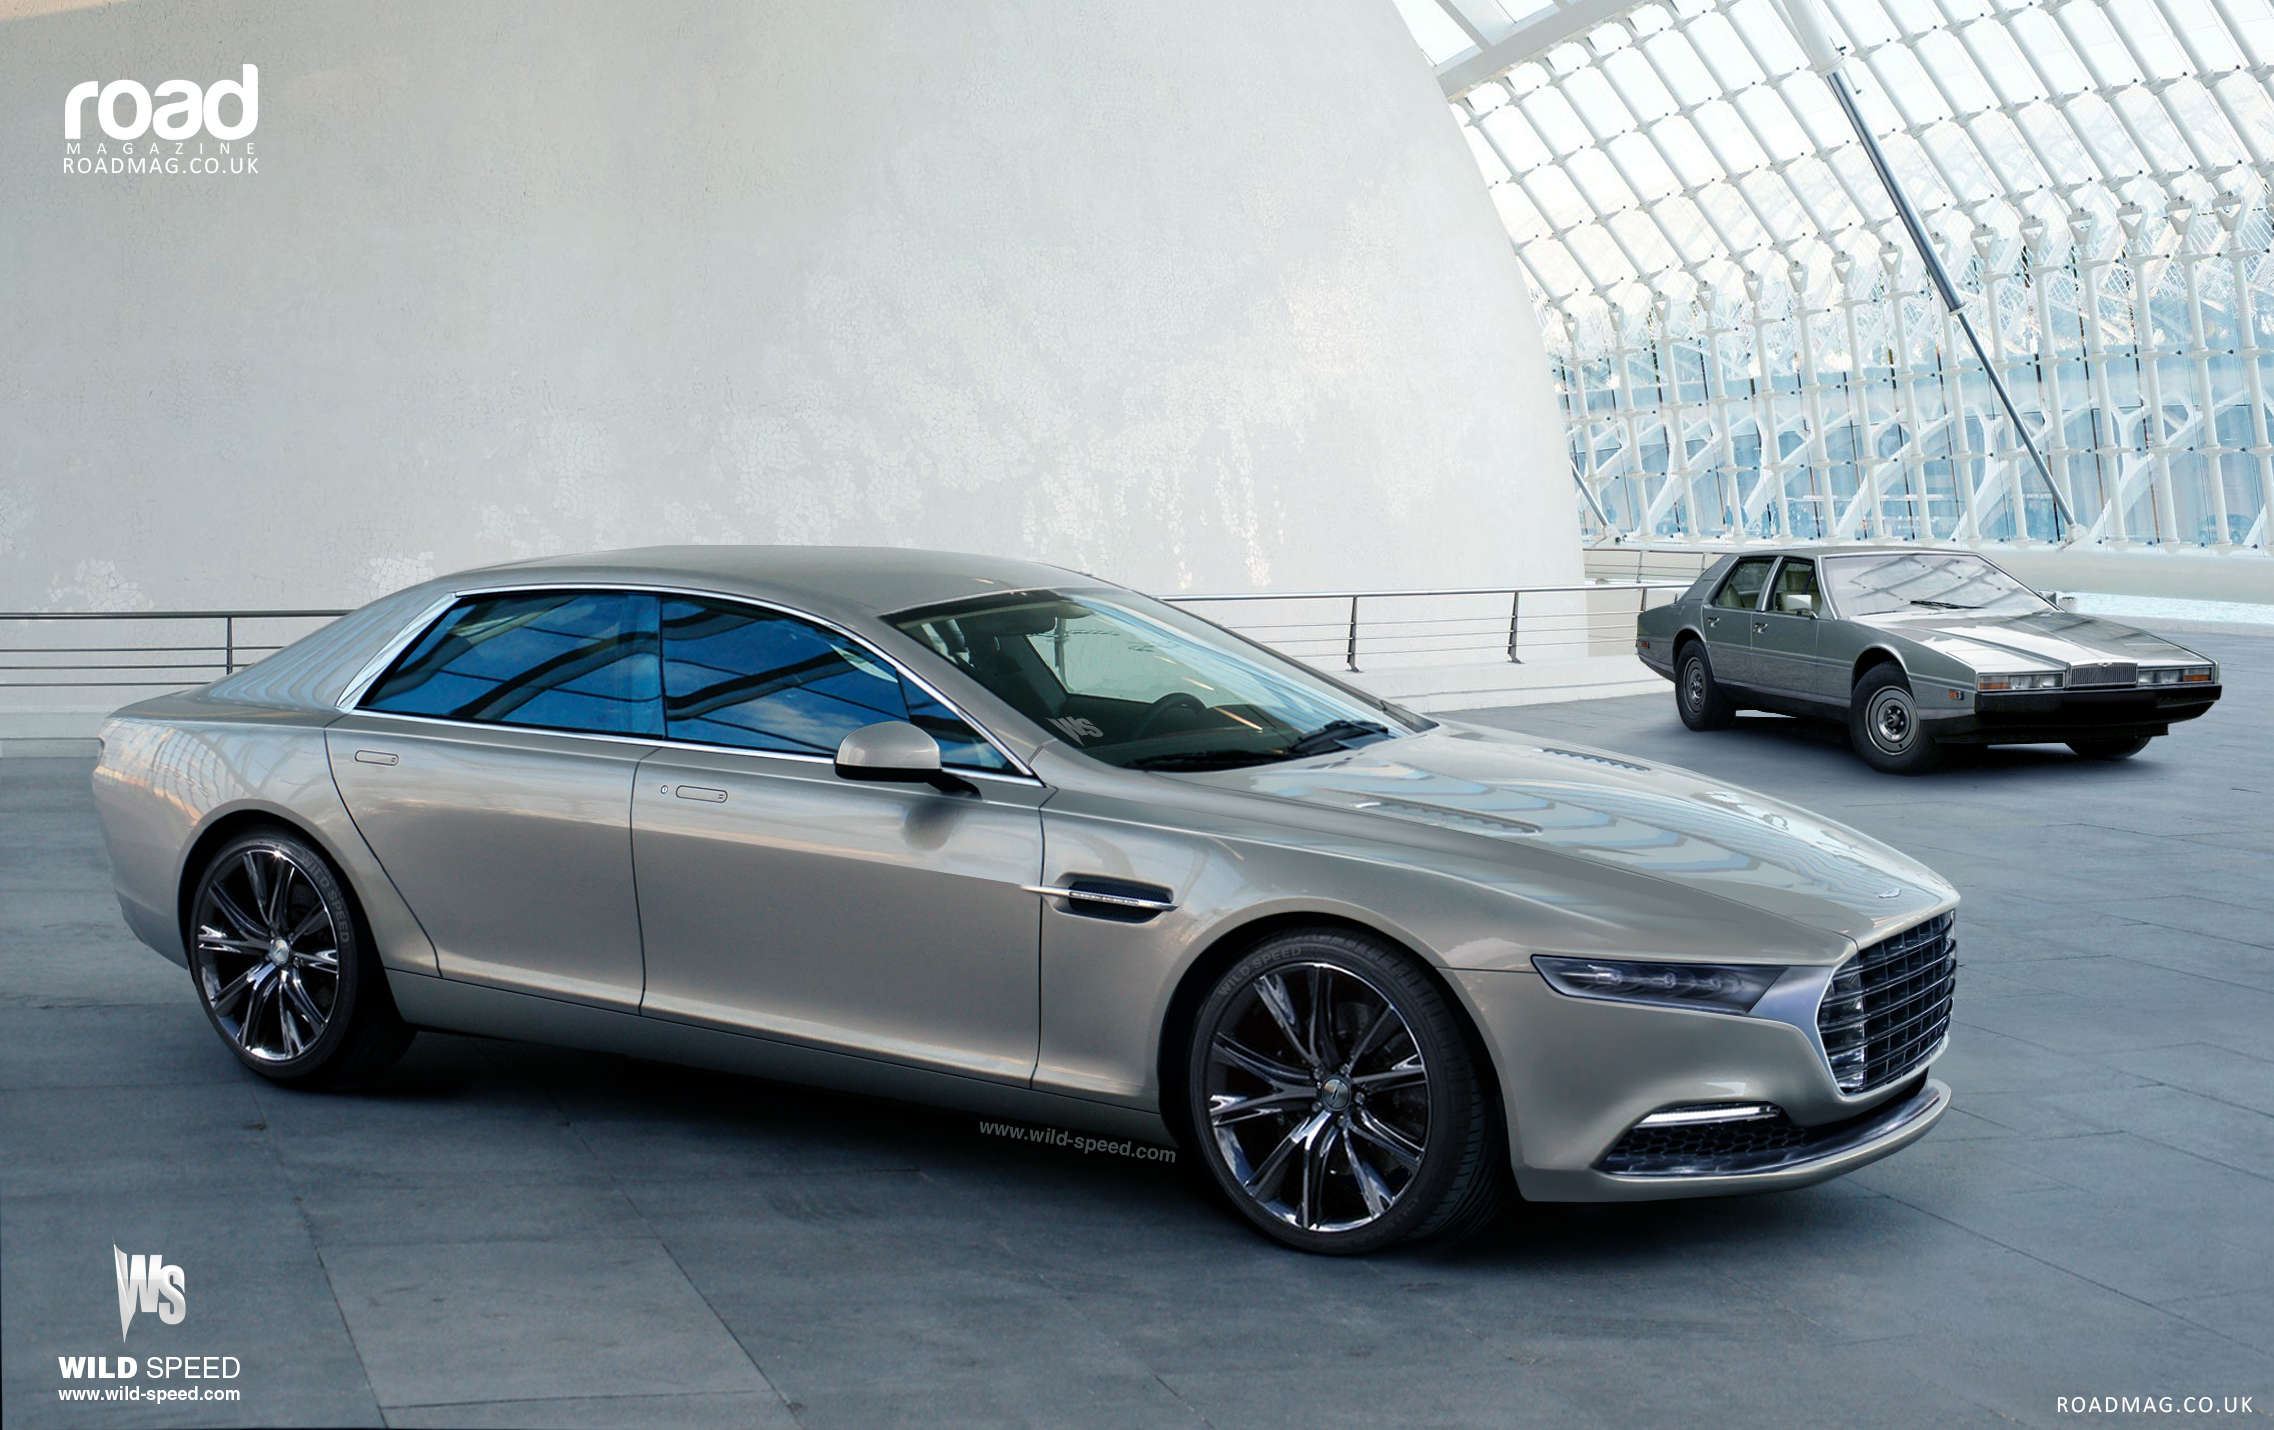 The Aston Martin Lagonda will be offered exclusively in the Middle East only